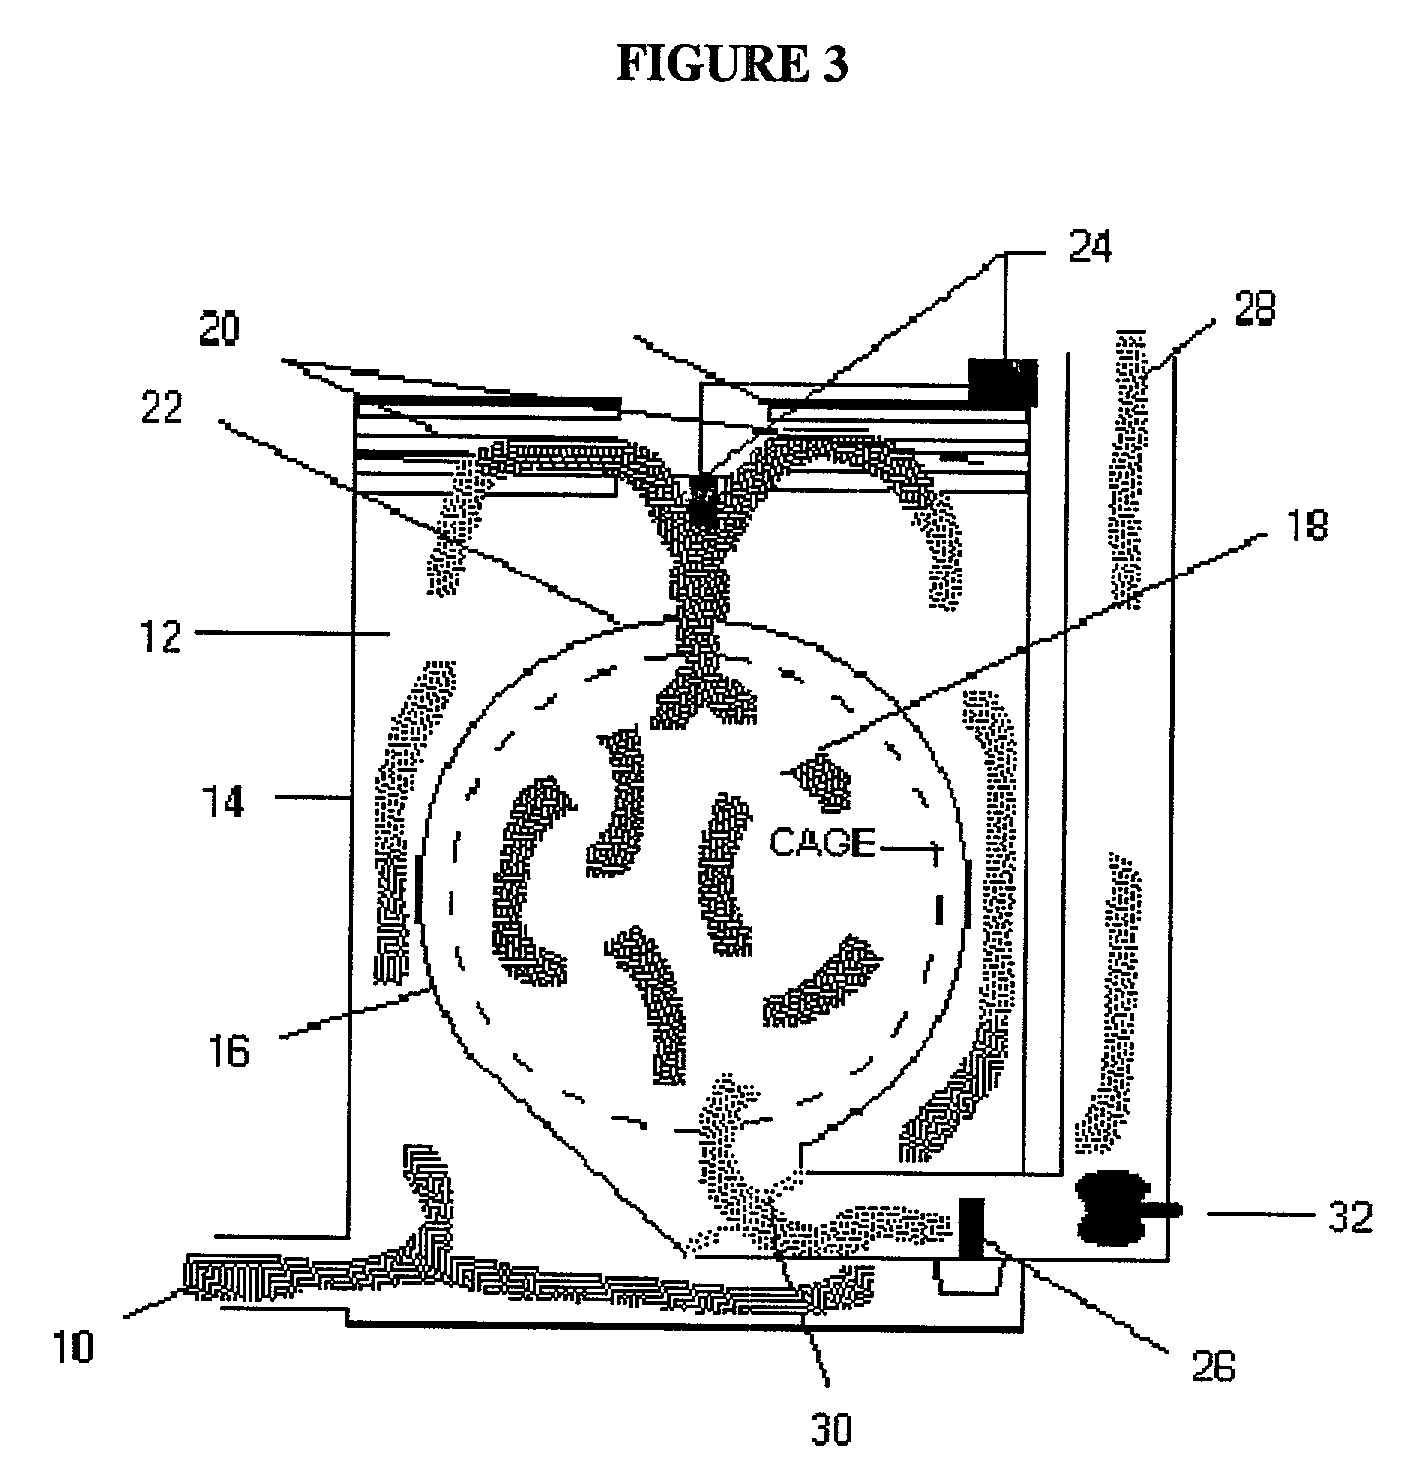 Apparatus, methods, and compositions for adding fragrance to laundry